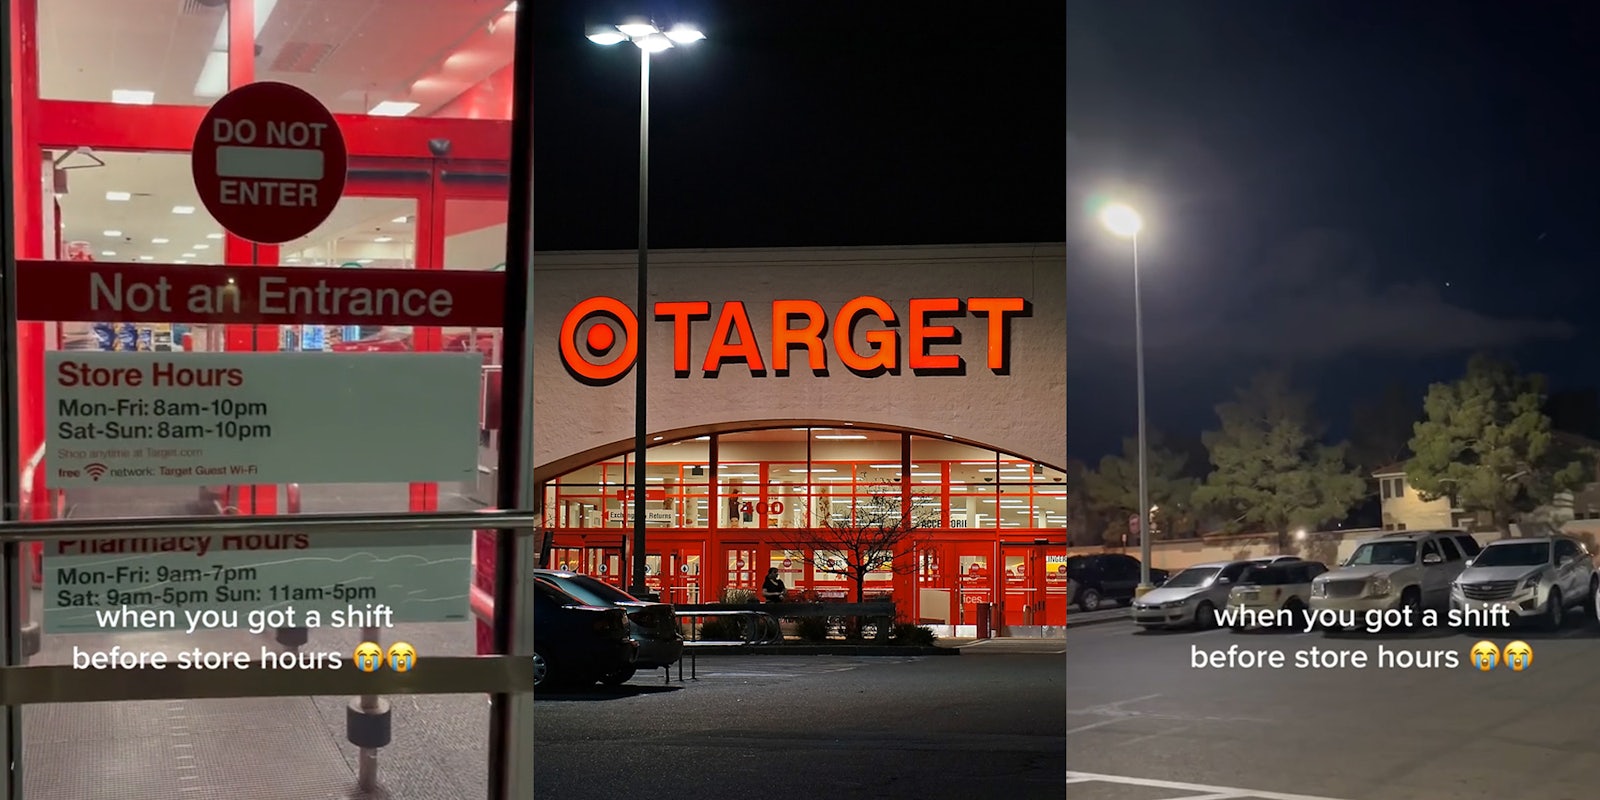 Target door with store hours paper with caption 'when you got a shift before store hours' (l) Target building with sign with dark sky (c) cars in Target parking lot with caption 'when you got a shift before store hours' (r)